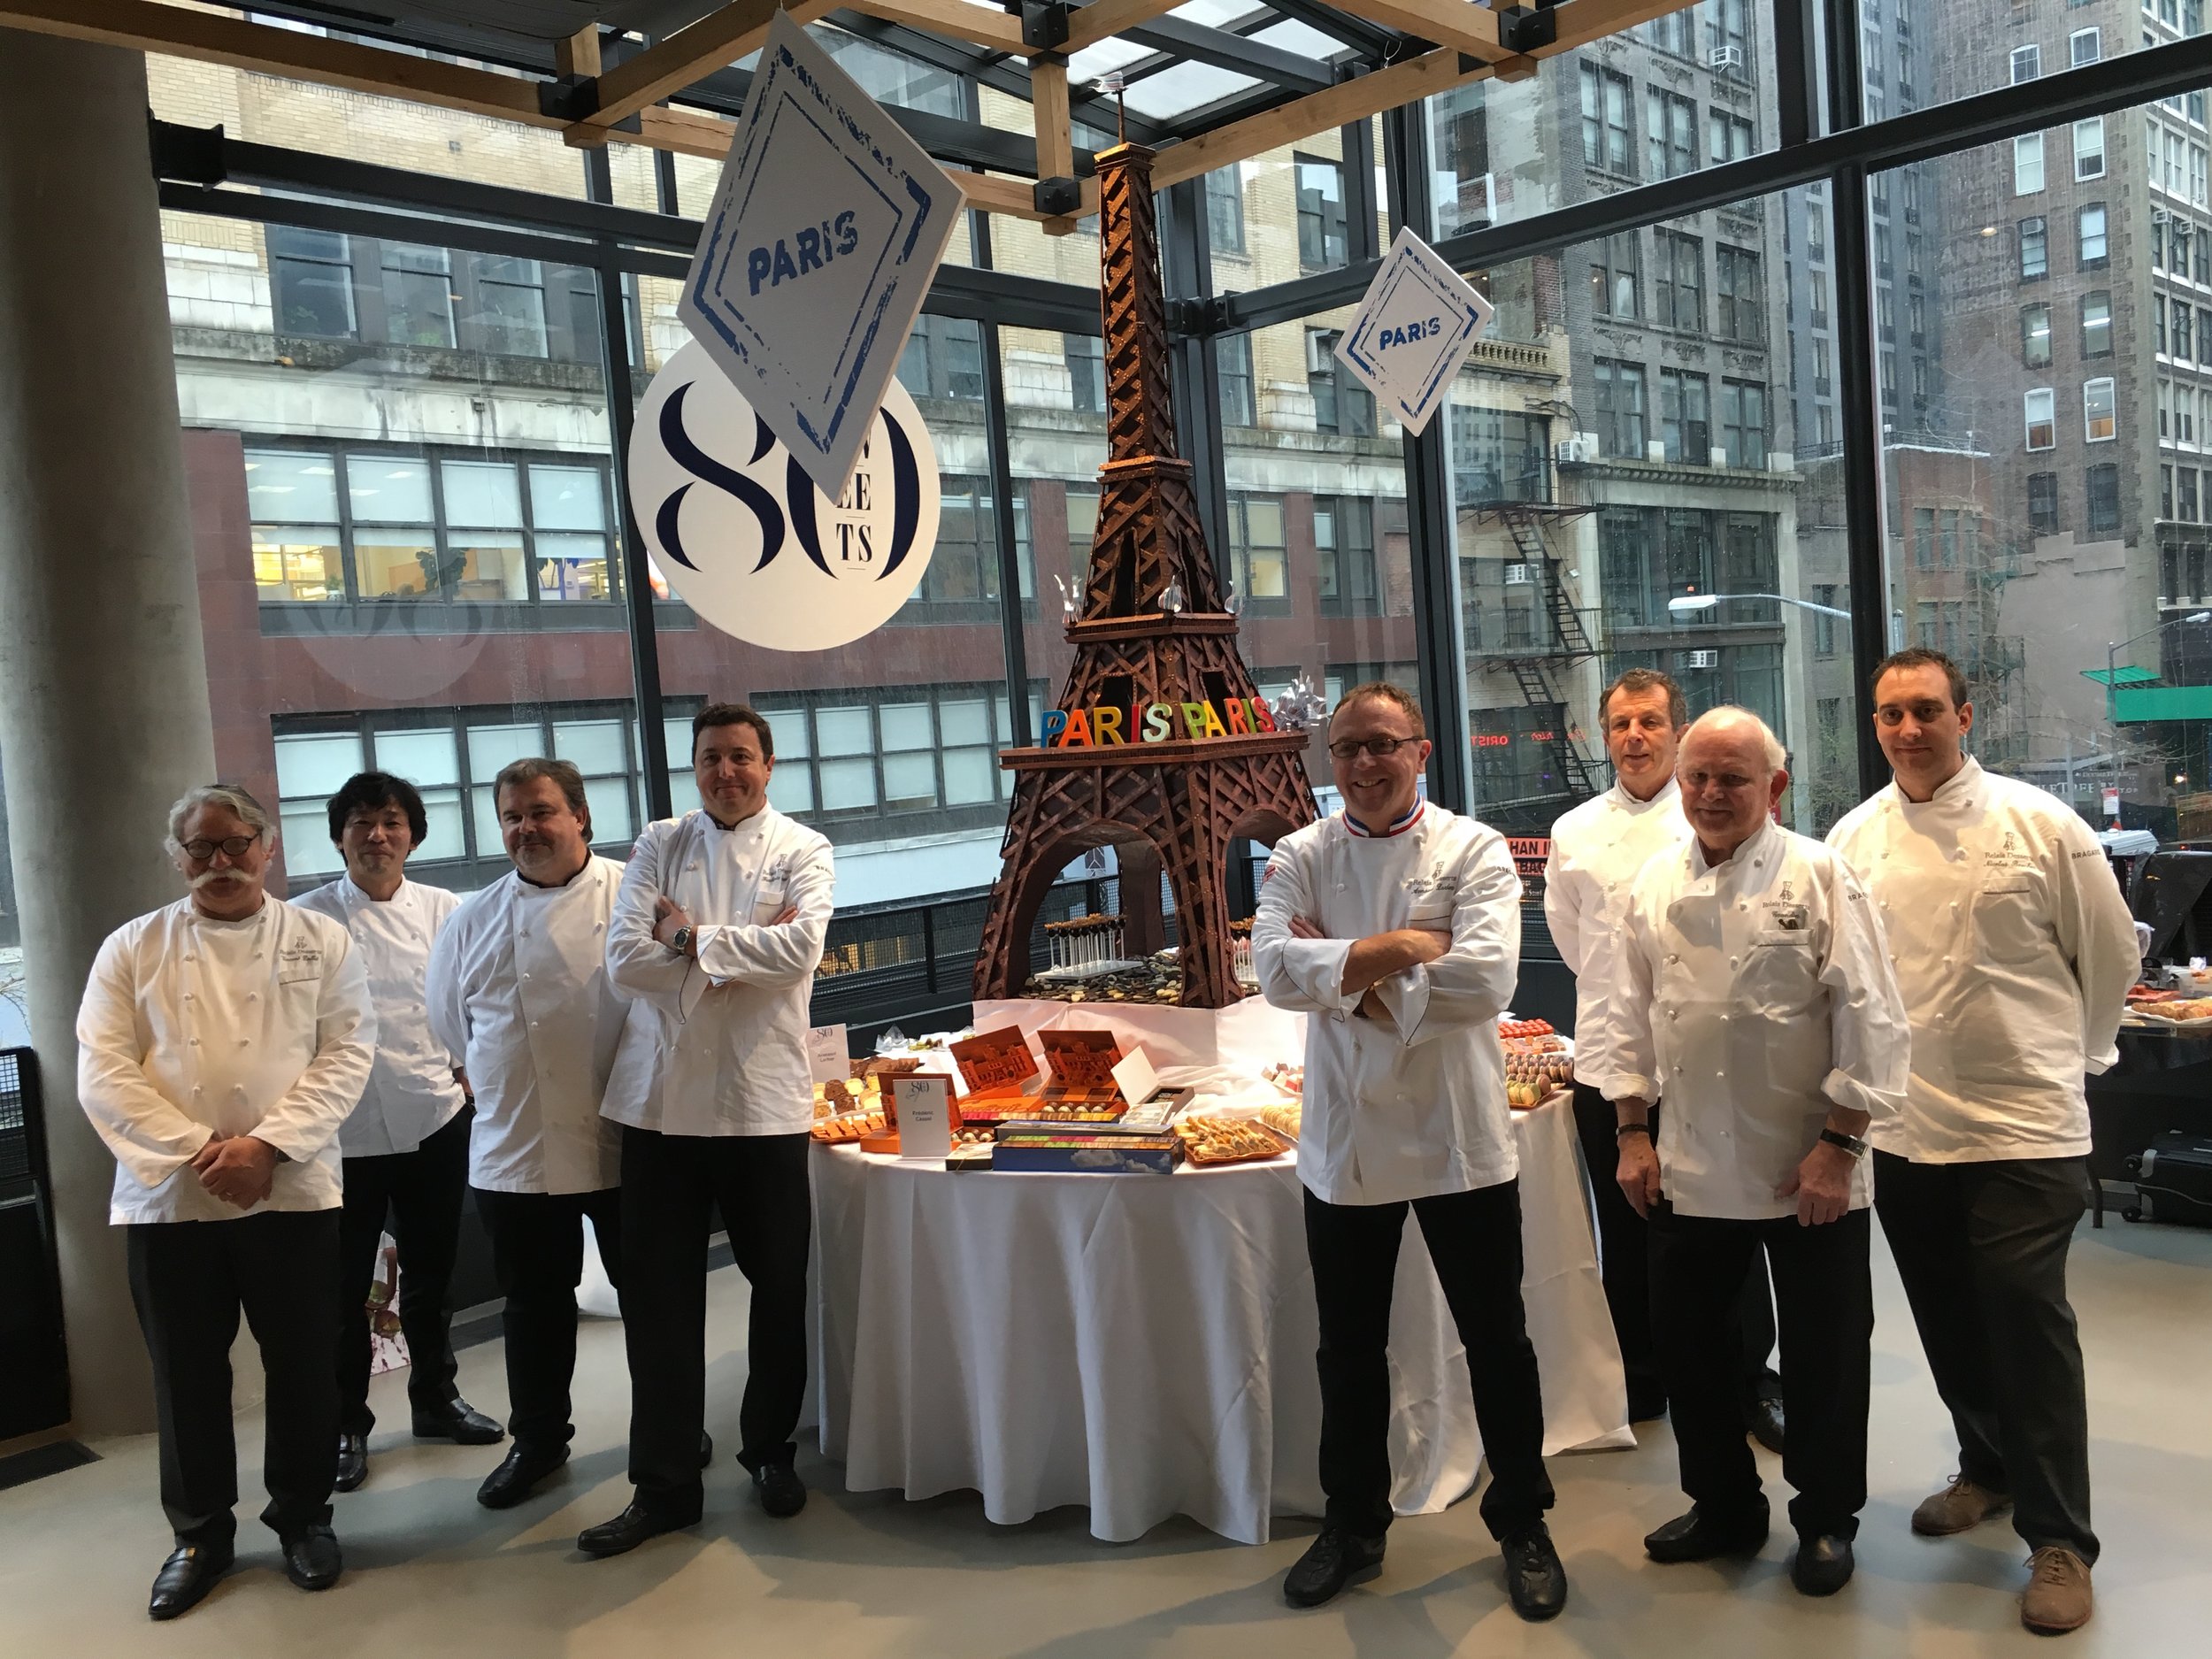 Around the World in 80 Sweets with Relais Chefs for City Harvest Annual Charity Event